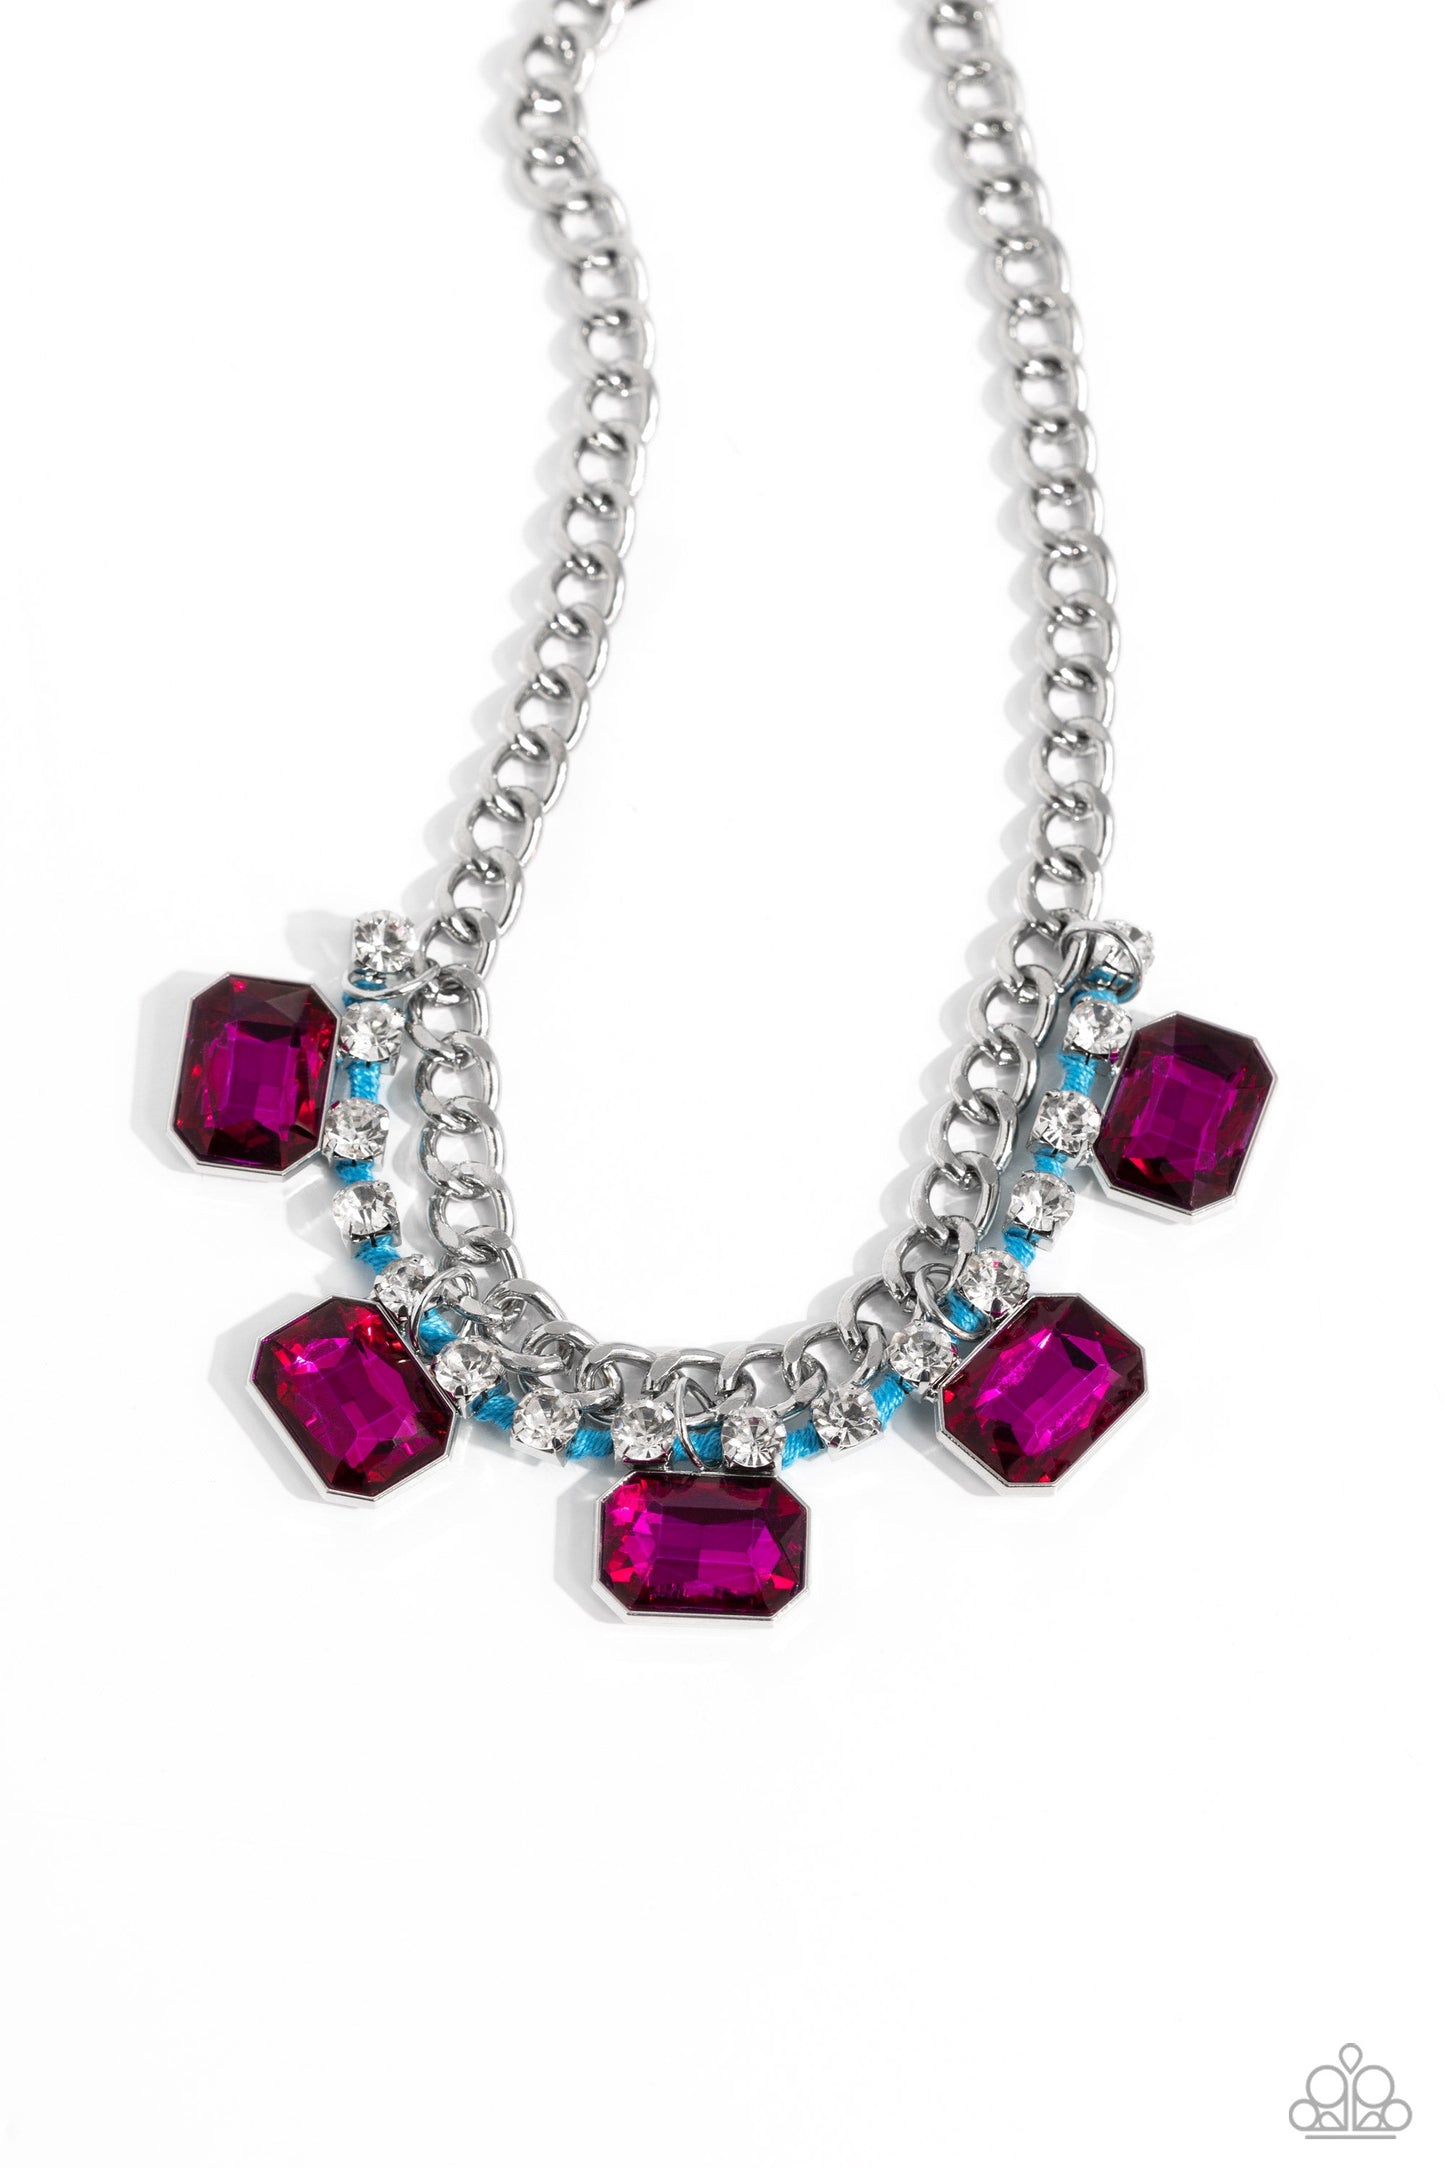 WEAVING Wonder - Blue and Pink Gem Necklace - Paparazzi Accessories - A strand of flat silver curb chain dramatically drapes across the chest for a bold industrial look. A row of faceted pink emerald-cut gems cascades from the bottom of a strand of glittery white rhinestones set in silver square fittings and ornately woven in turquoise cording for a modern look.